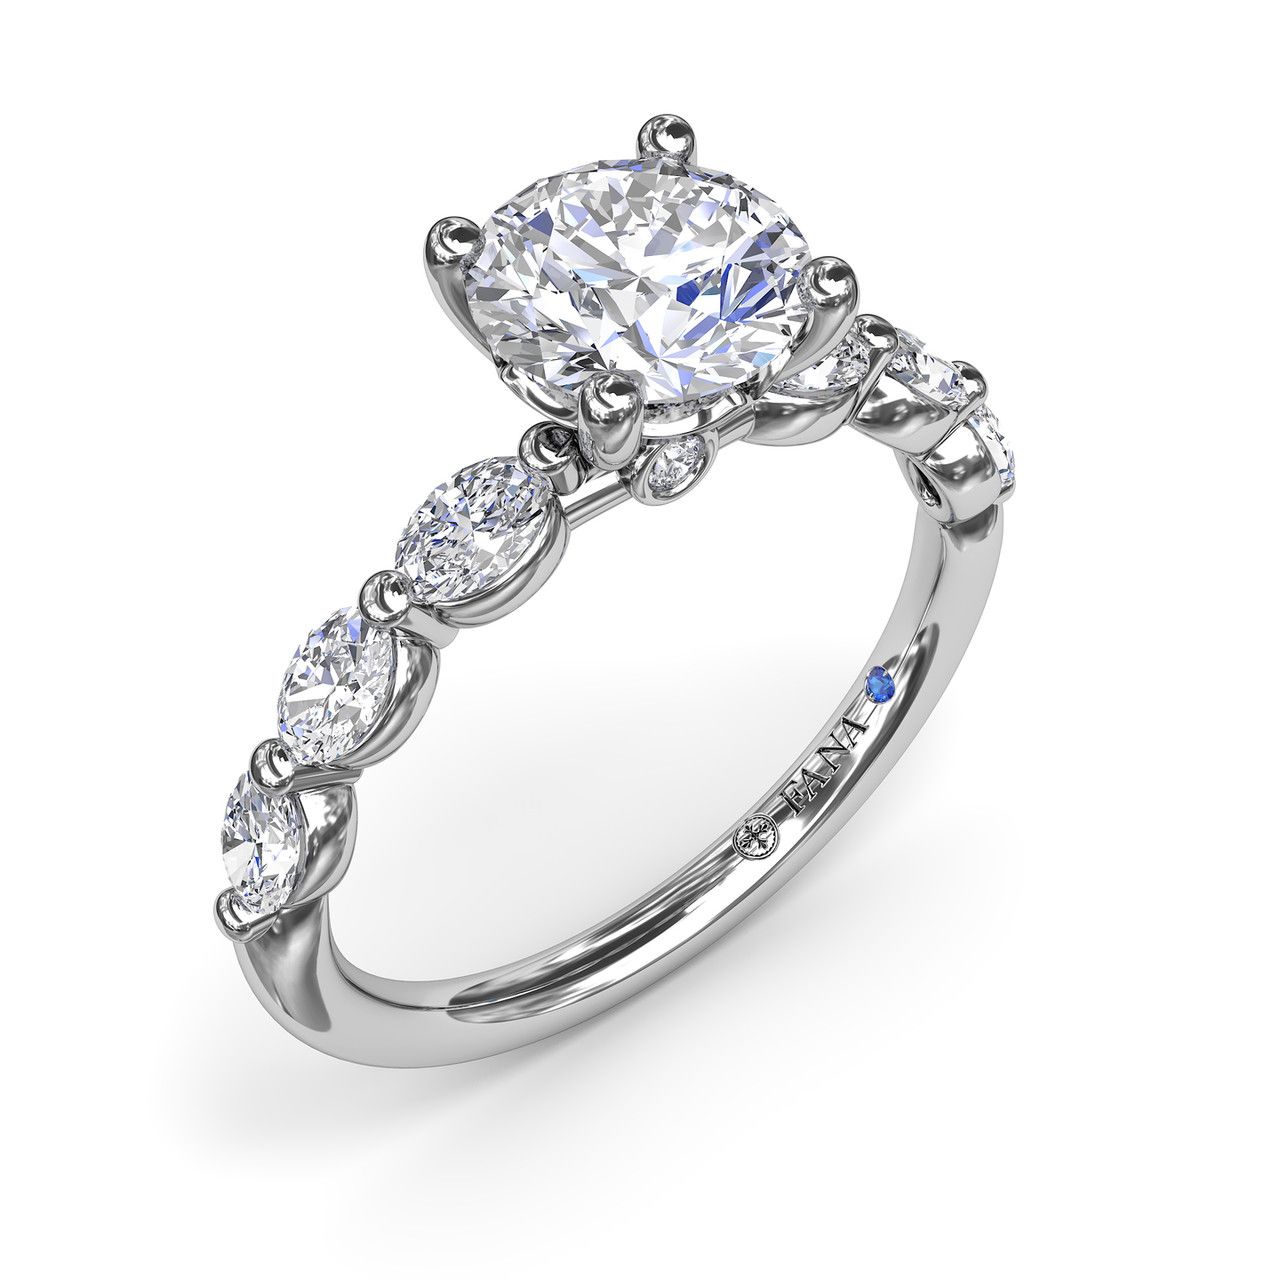 14K WHITE GOLD SHARED PRONG SEMI-MOUNT RING SIZE 6.5 WITH 6=0.93TW MARQUISE G-H VS2-SI1 DIAMONDS AND 2=0.02TW ROUND G-H VS2-SI1 DIAMONDS AND ONE ROUND BLUE SAPPHIRE   (2.62 GRAMS)